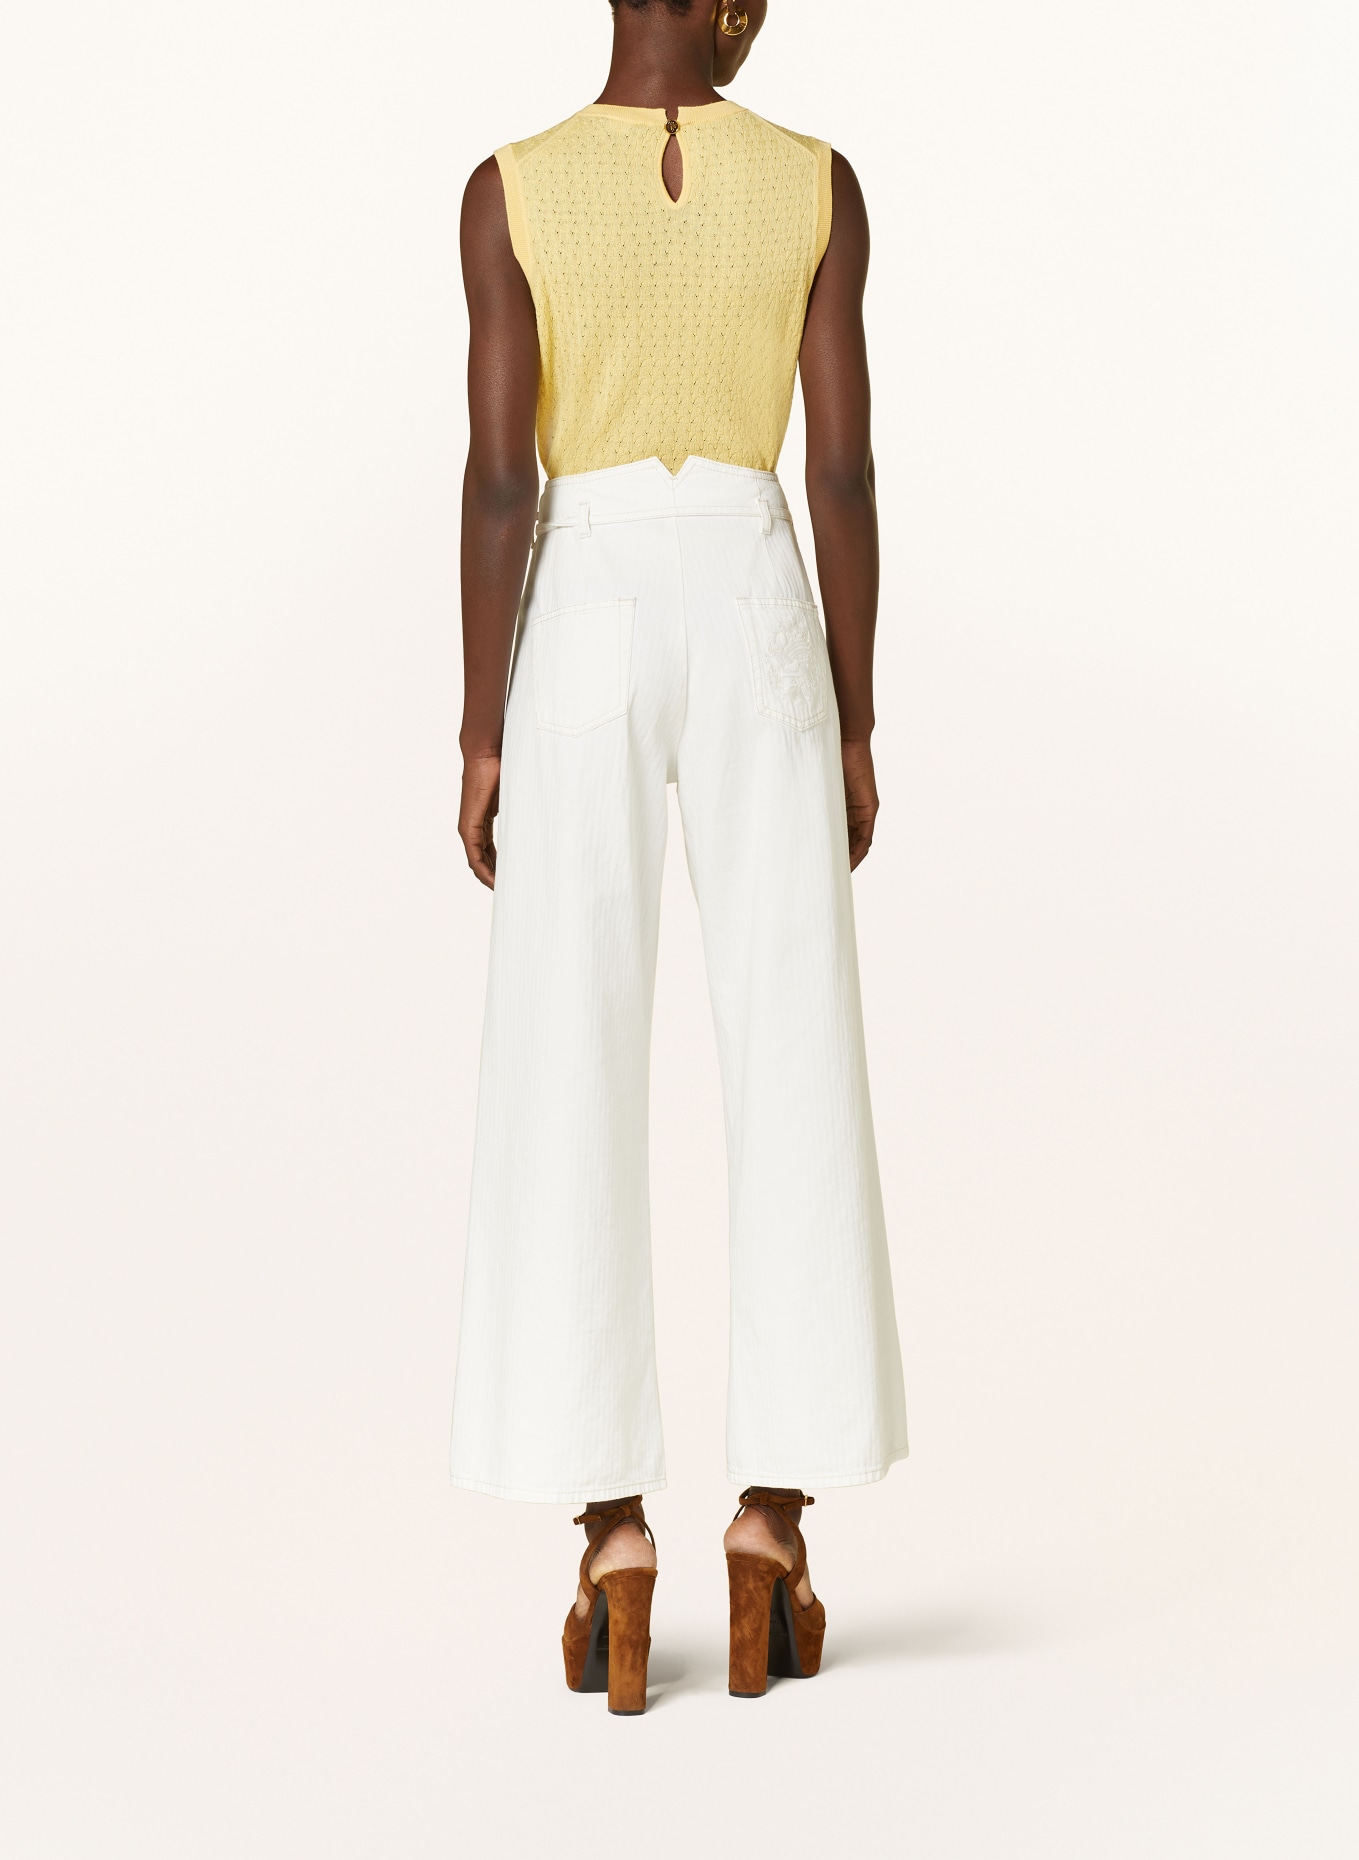 ETRO Knit top, Color: YELLOW (Image 3)